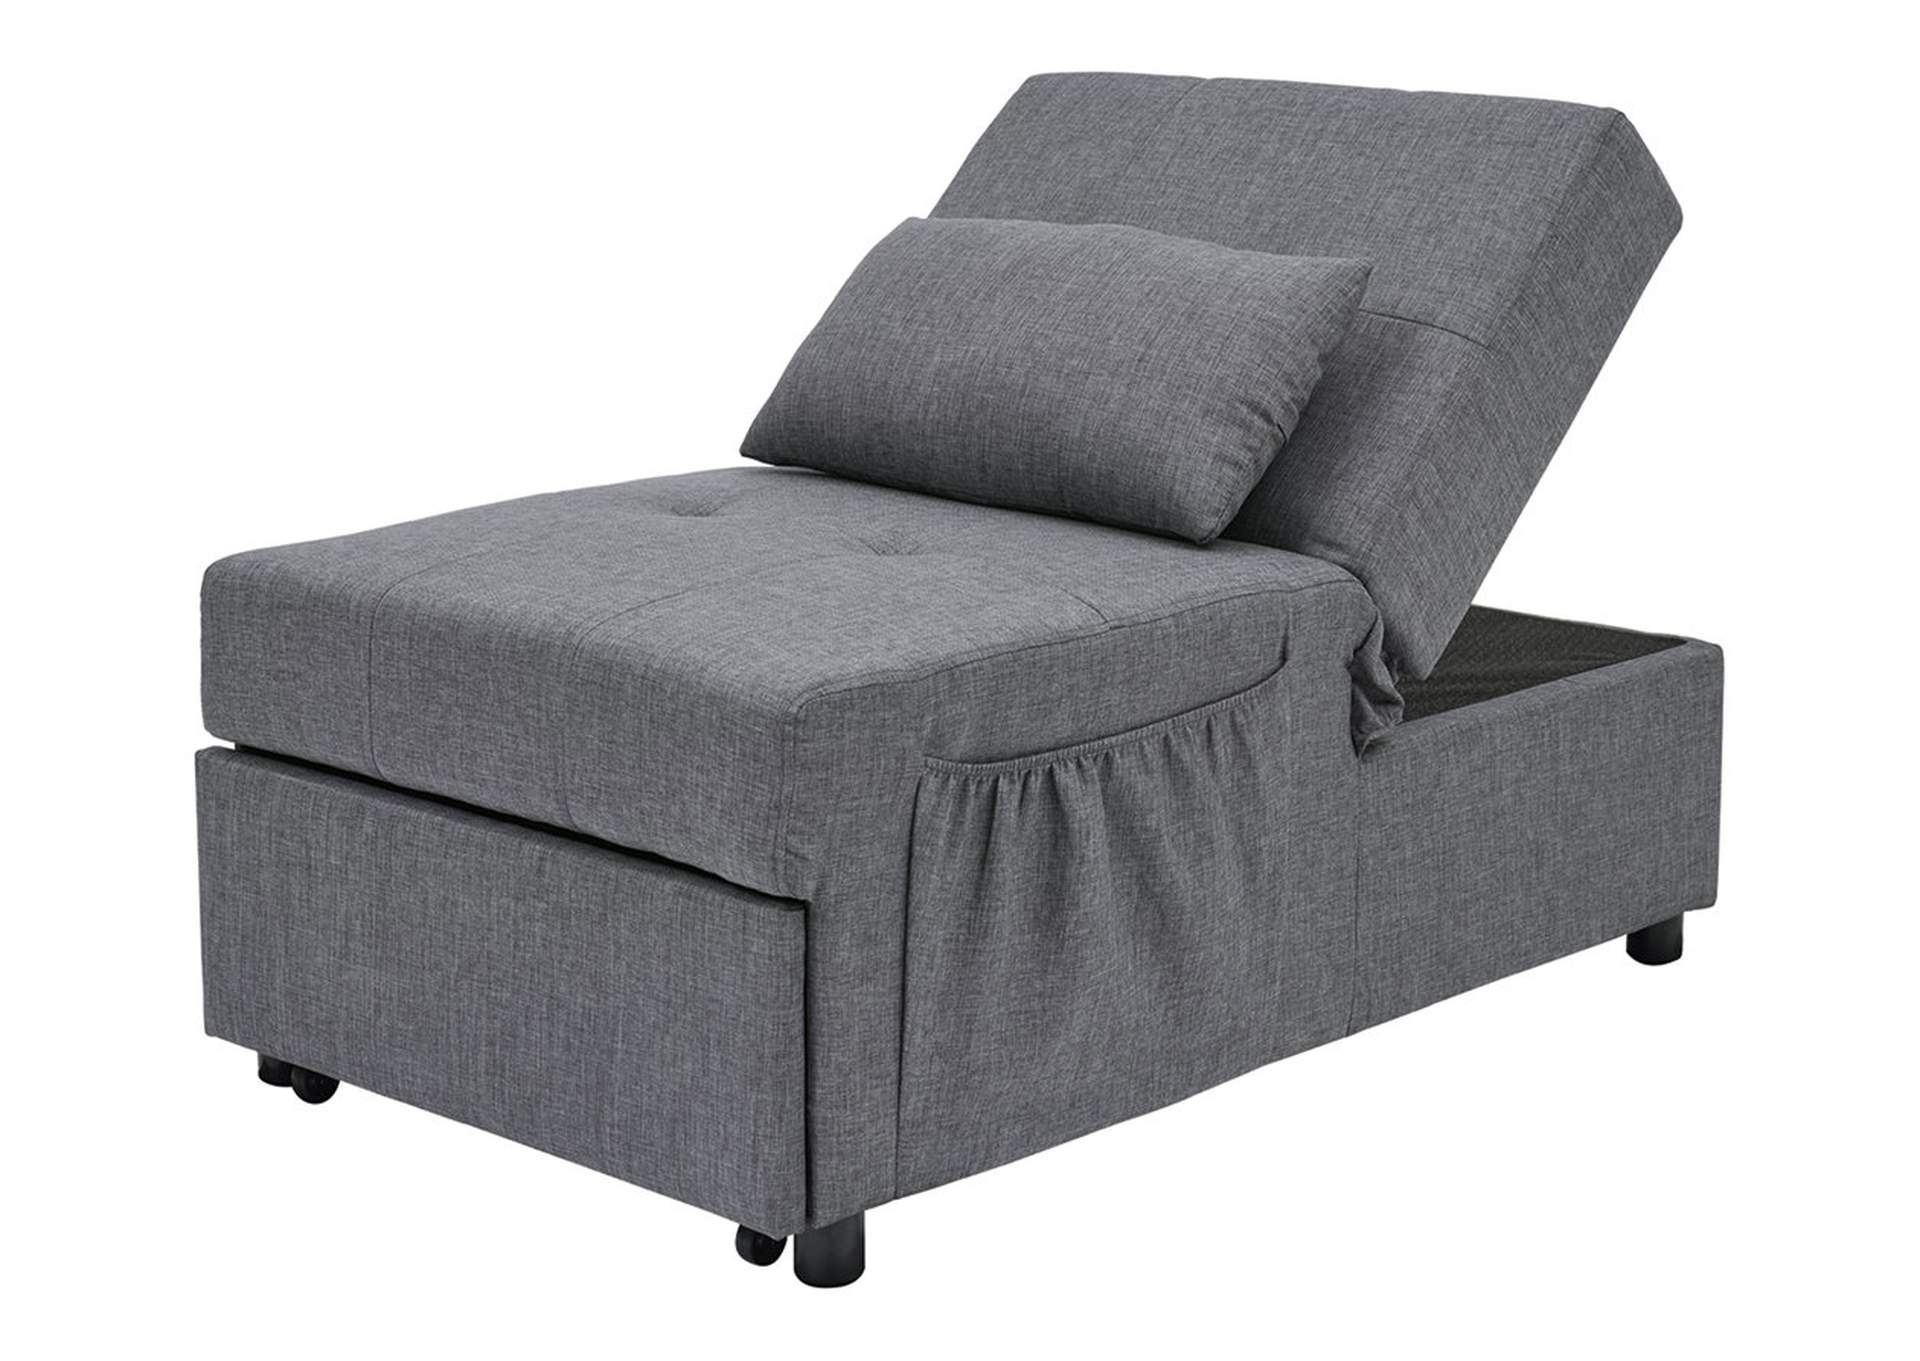 Thrall Single Seat Pop Up Sleeper,Signature Design By Ashley